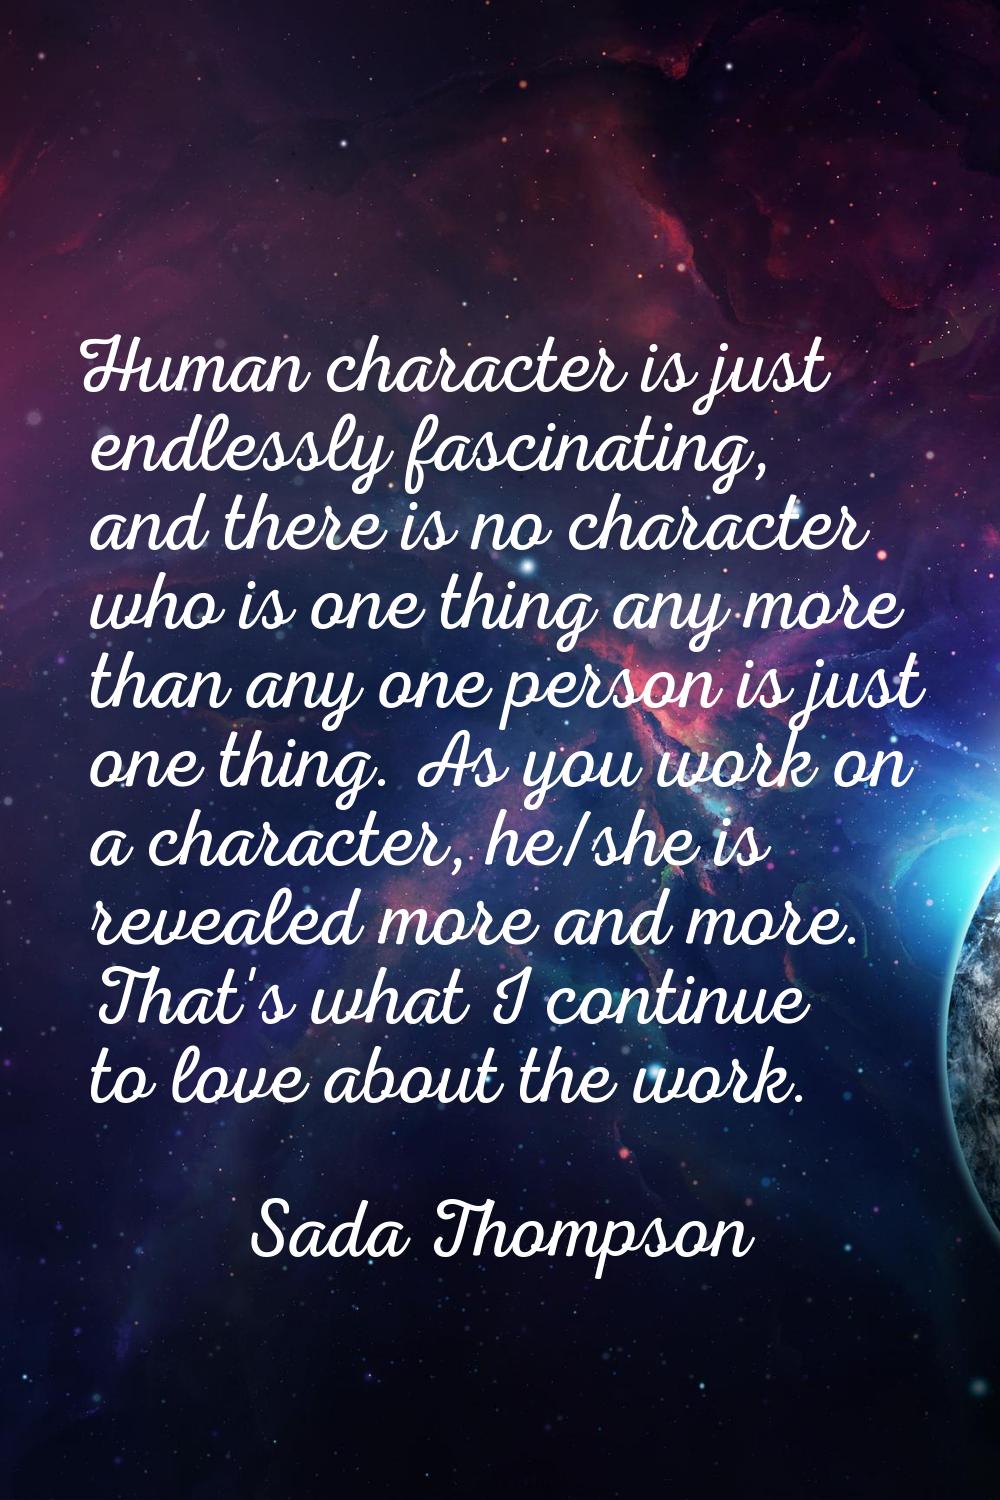 Human character is just endlessly fascinating, and there is no character who is one thing any more 